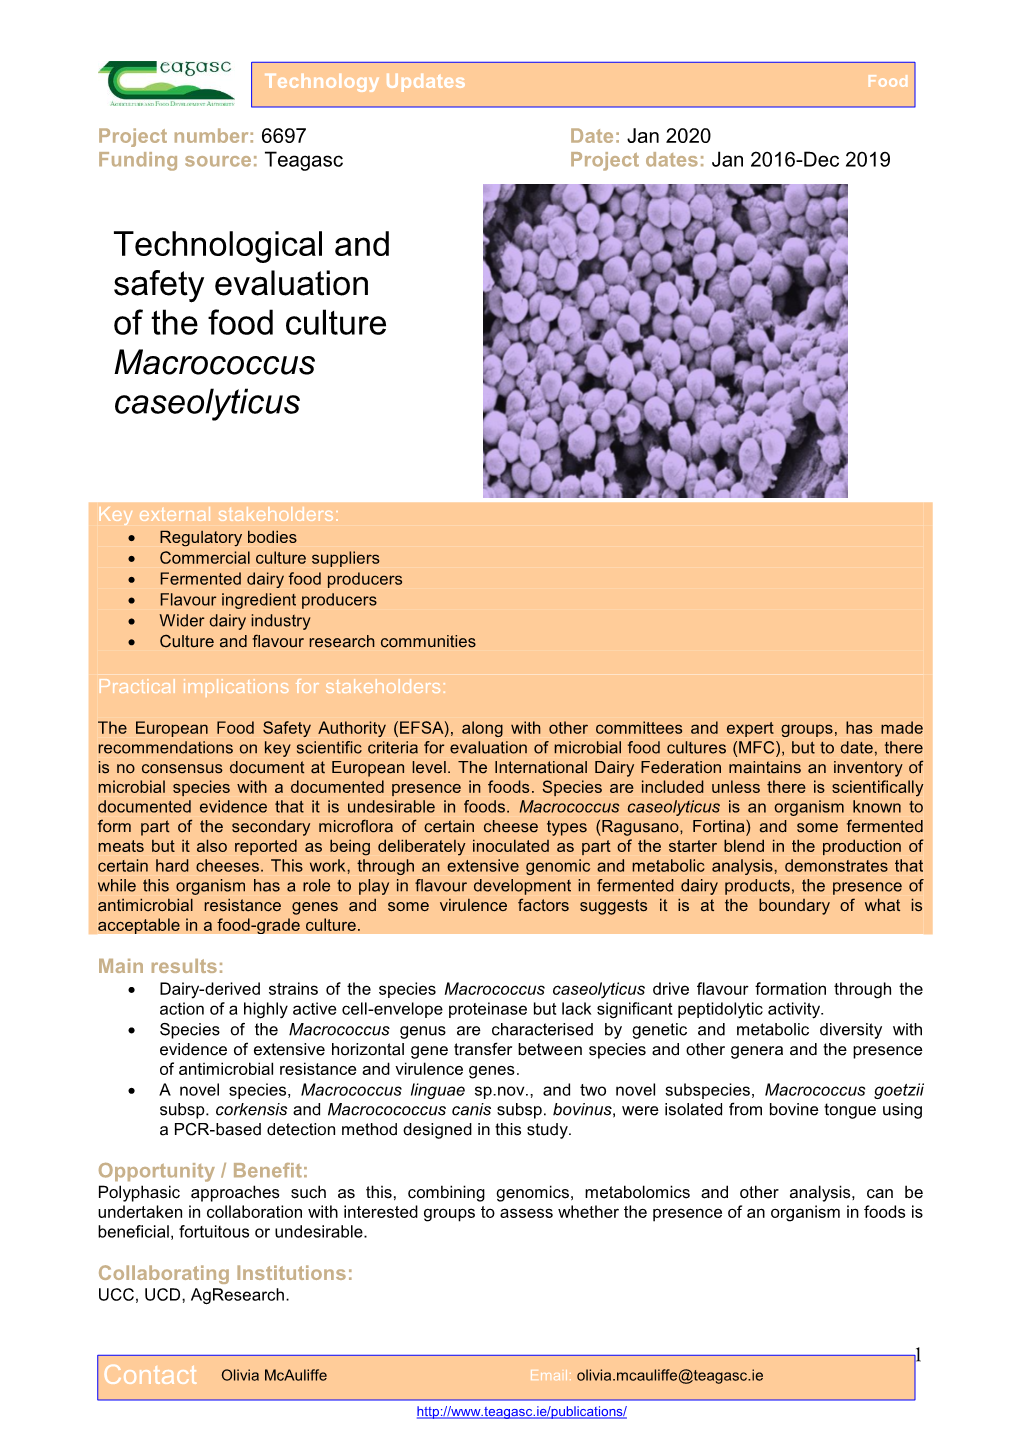 Technological and Safety Evaluation of the Food Culture Macrococcus